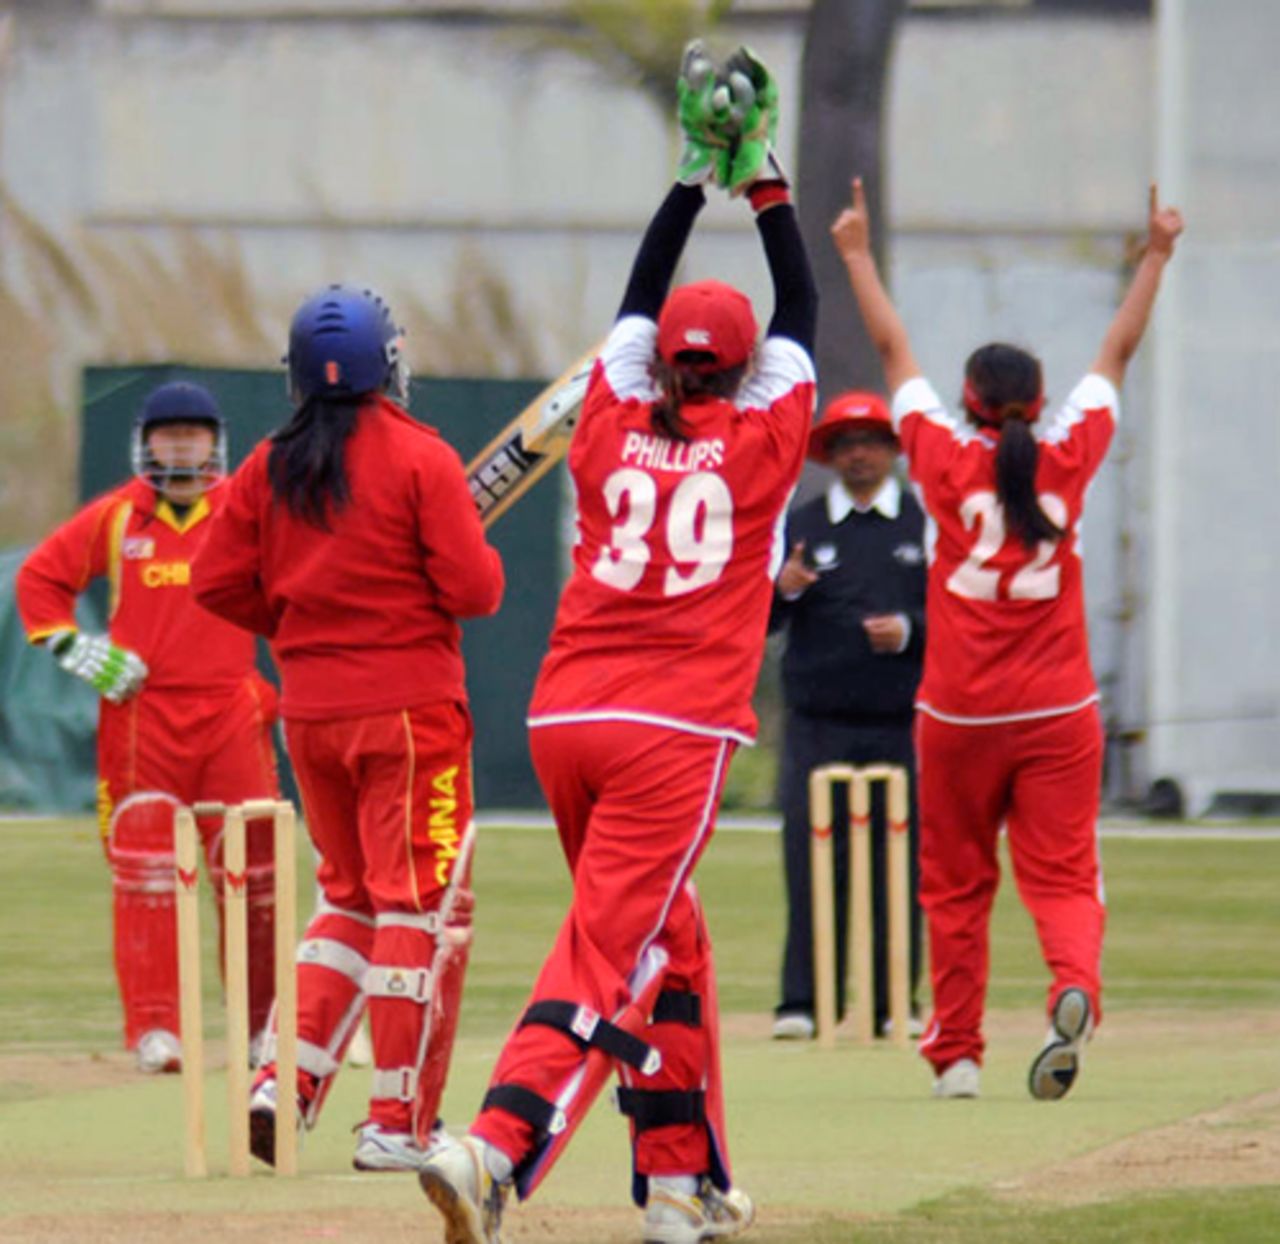 China Women's Yu Miao is caught behind by Hong Kong Women's Emma Phillips off the bowling of Keenu Gill during an international friendly played at the Kai Tak Cricket Ground